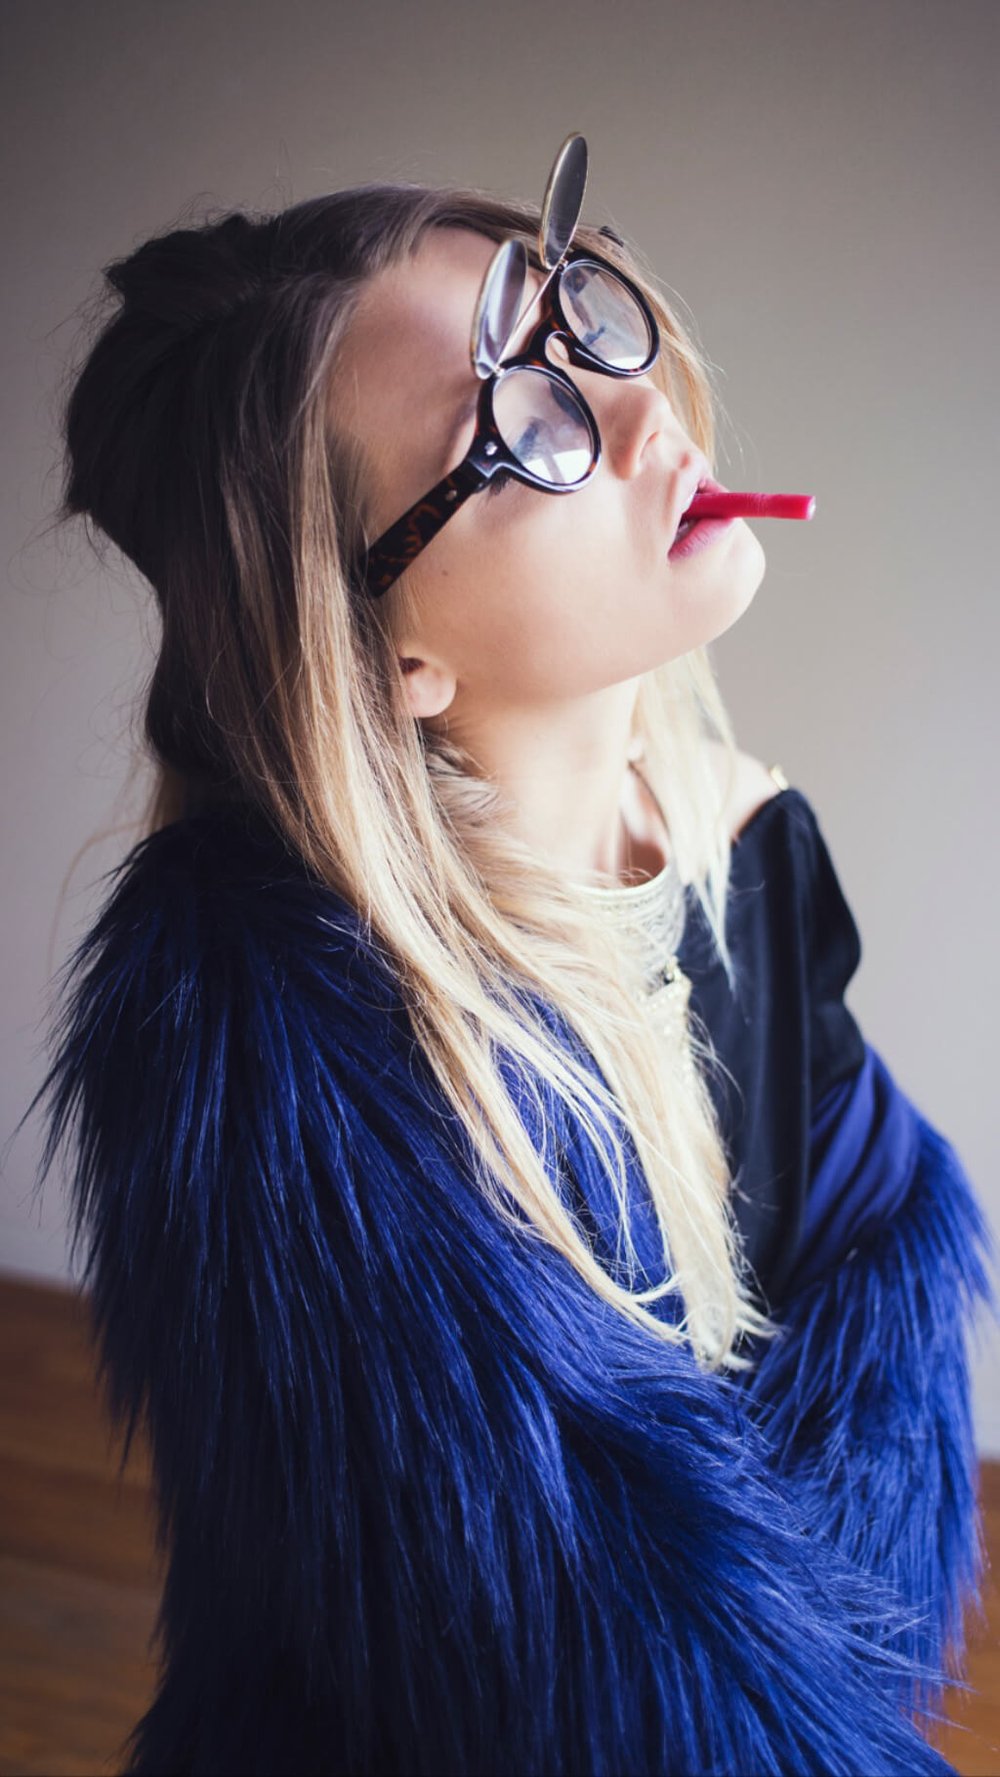 woman in fur coat and glasses using candy as a cigarette